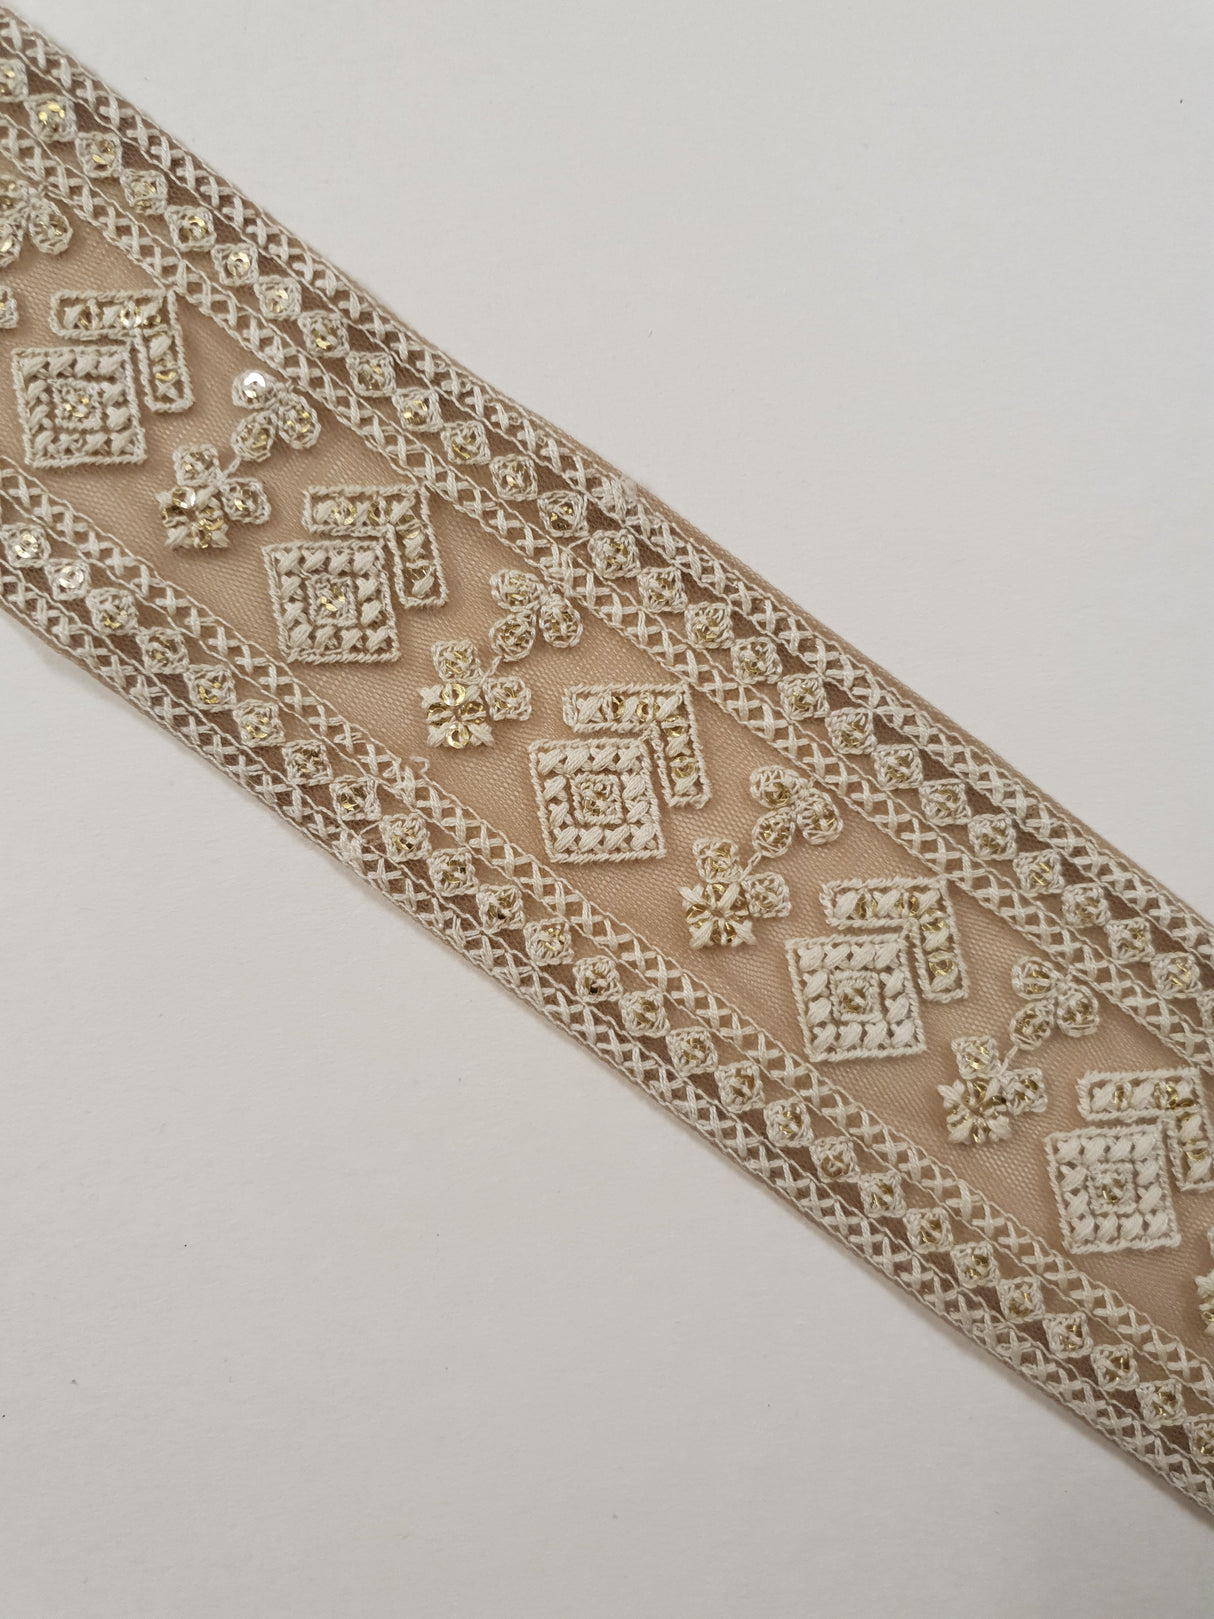 Embroidered Trim - 1 Meter - (ITR-1283)